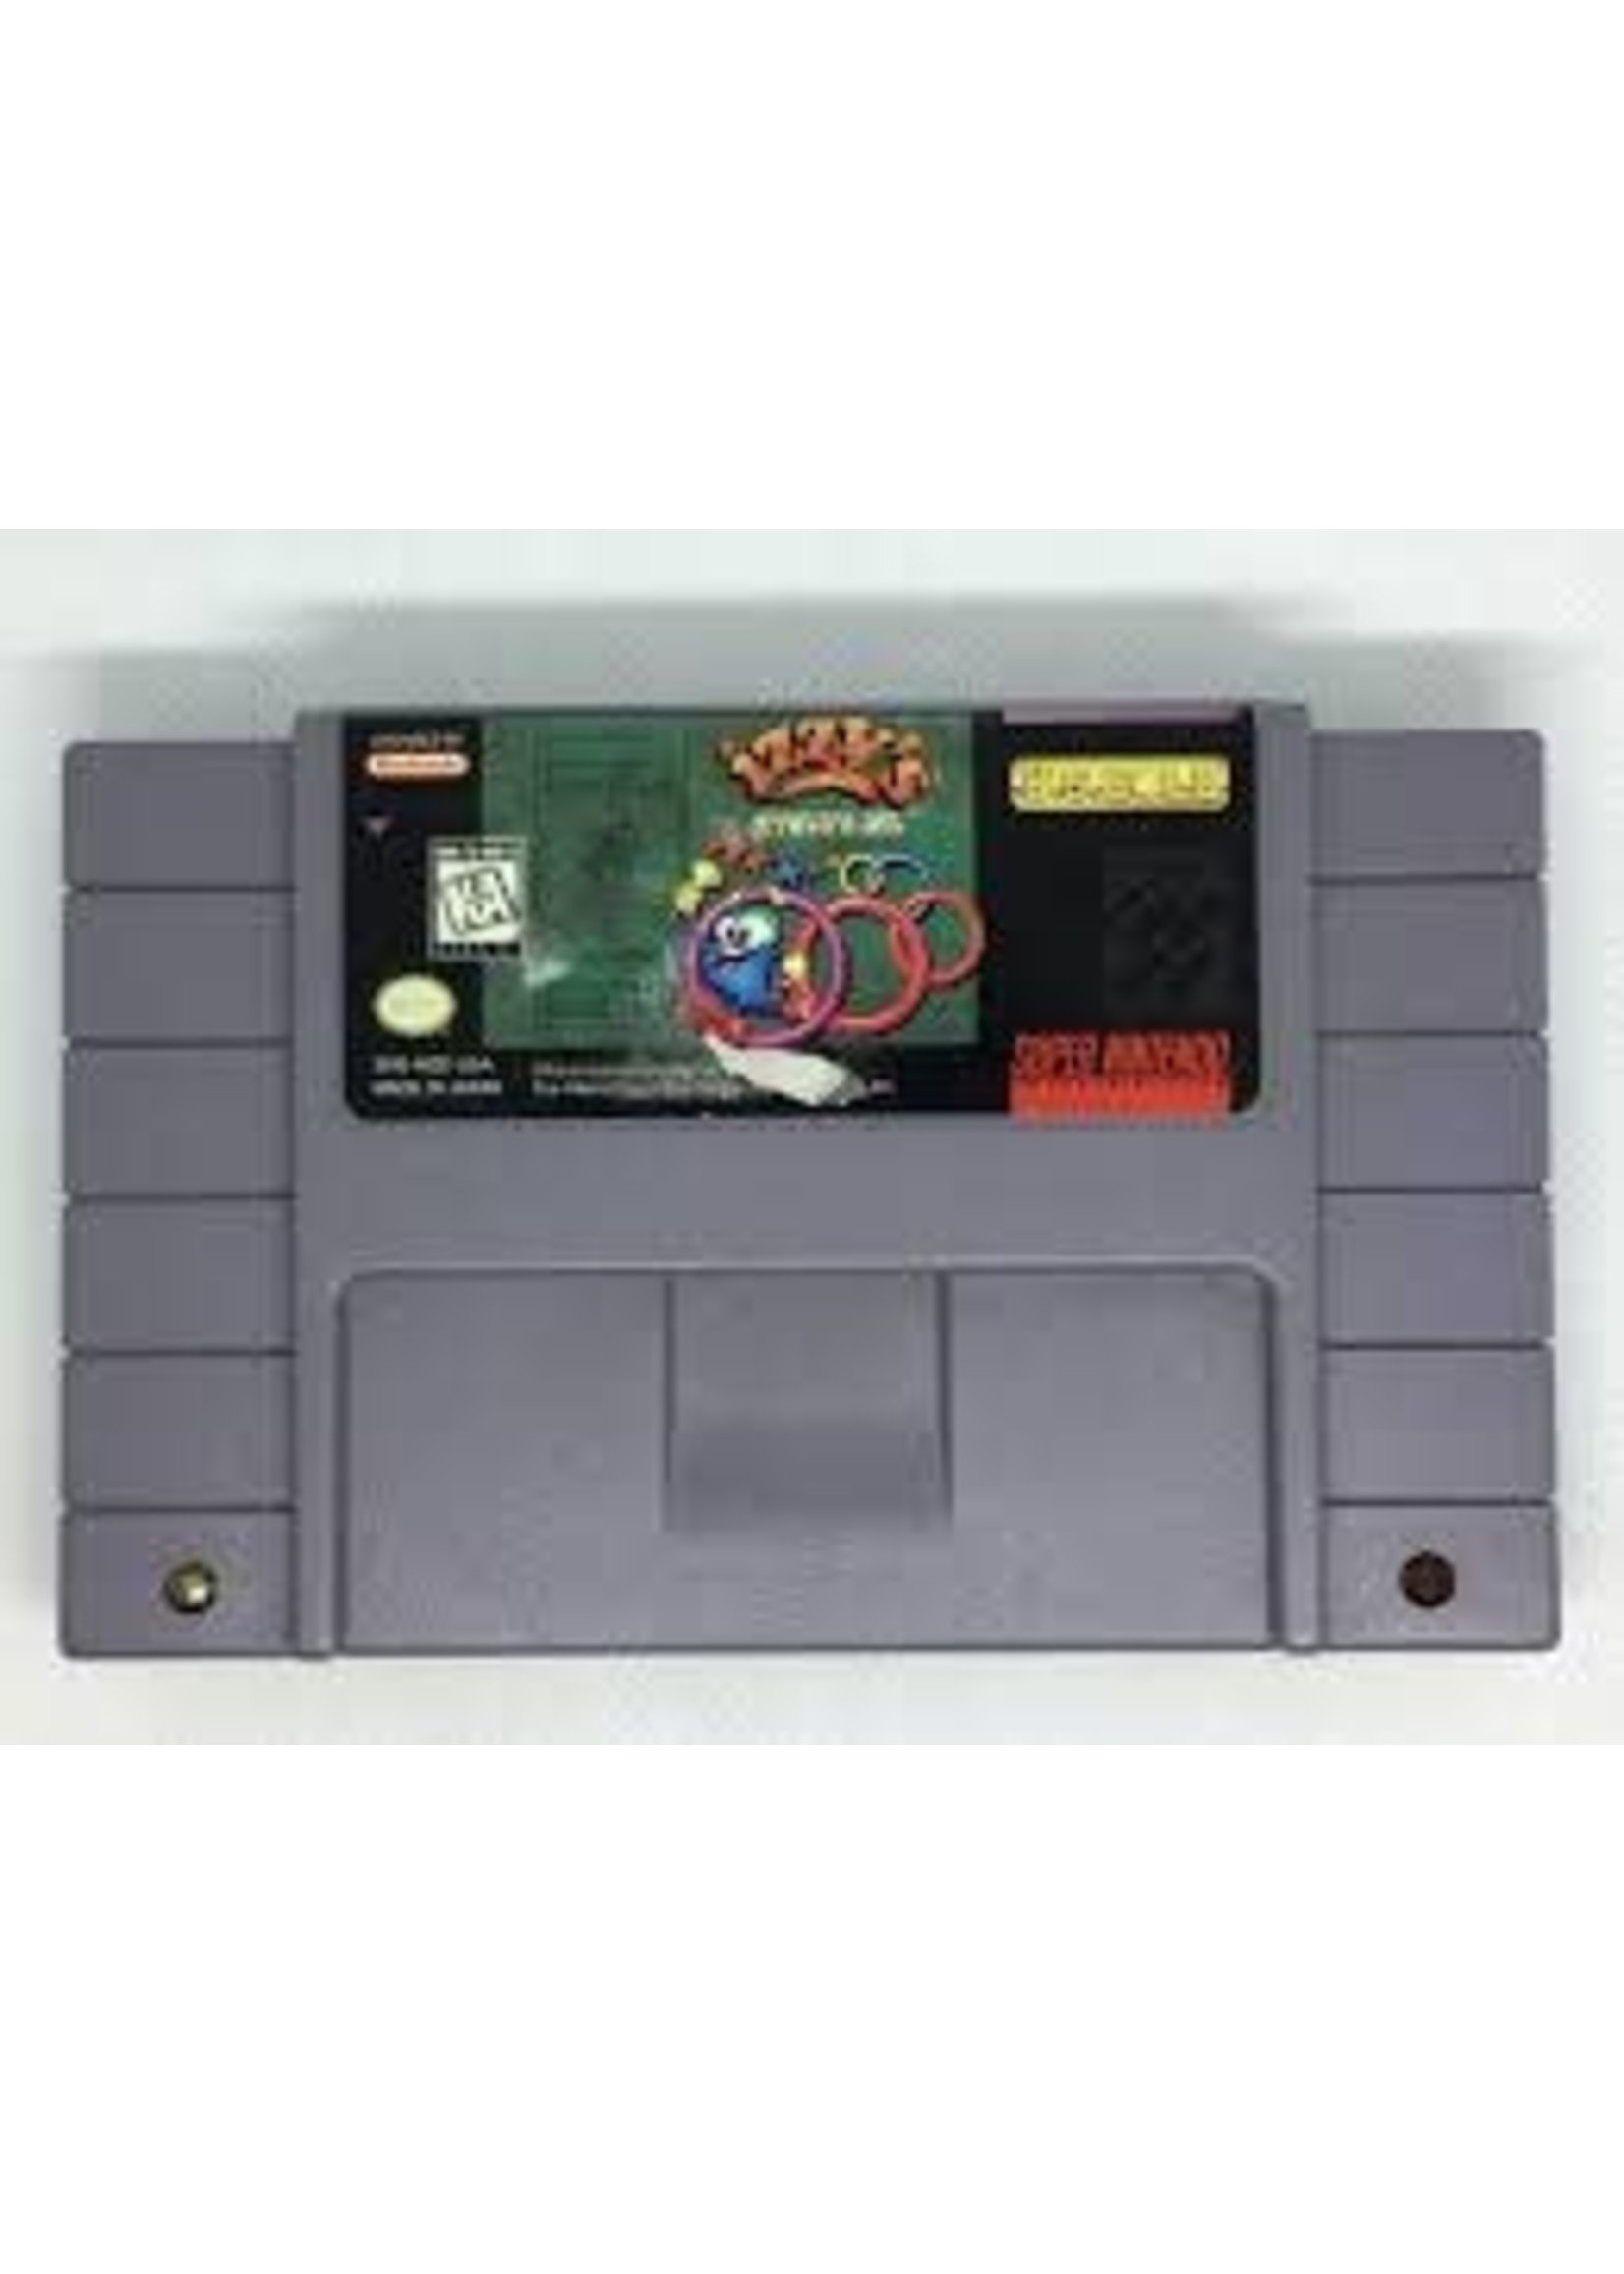 Nintendo Super Nintendo (SNES) Izzy's Quest for the Olympic Rings